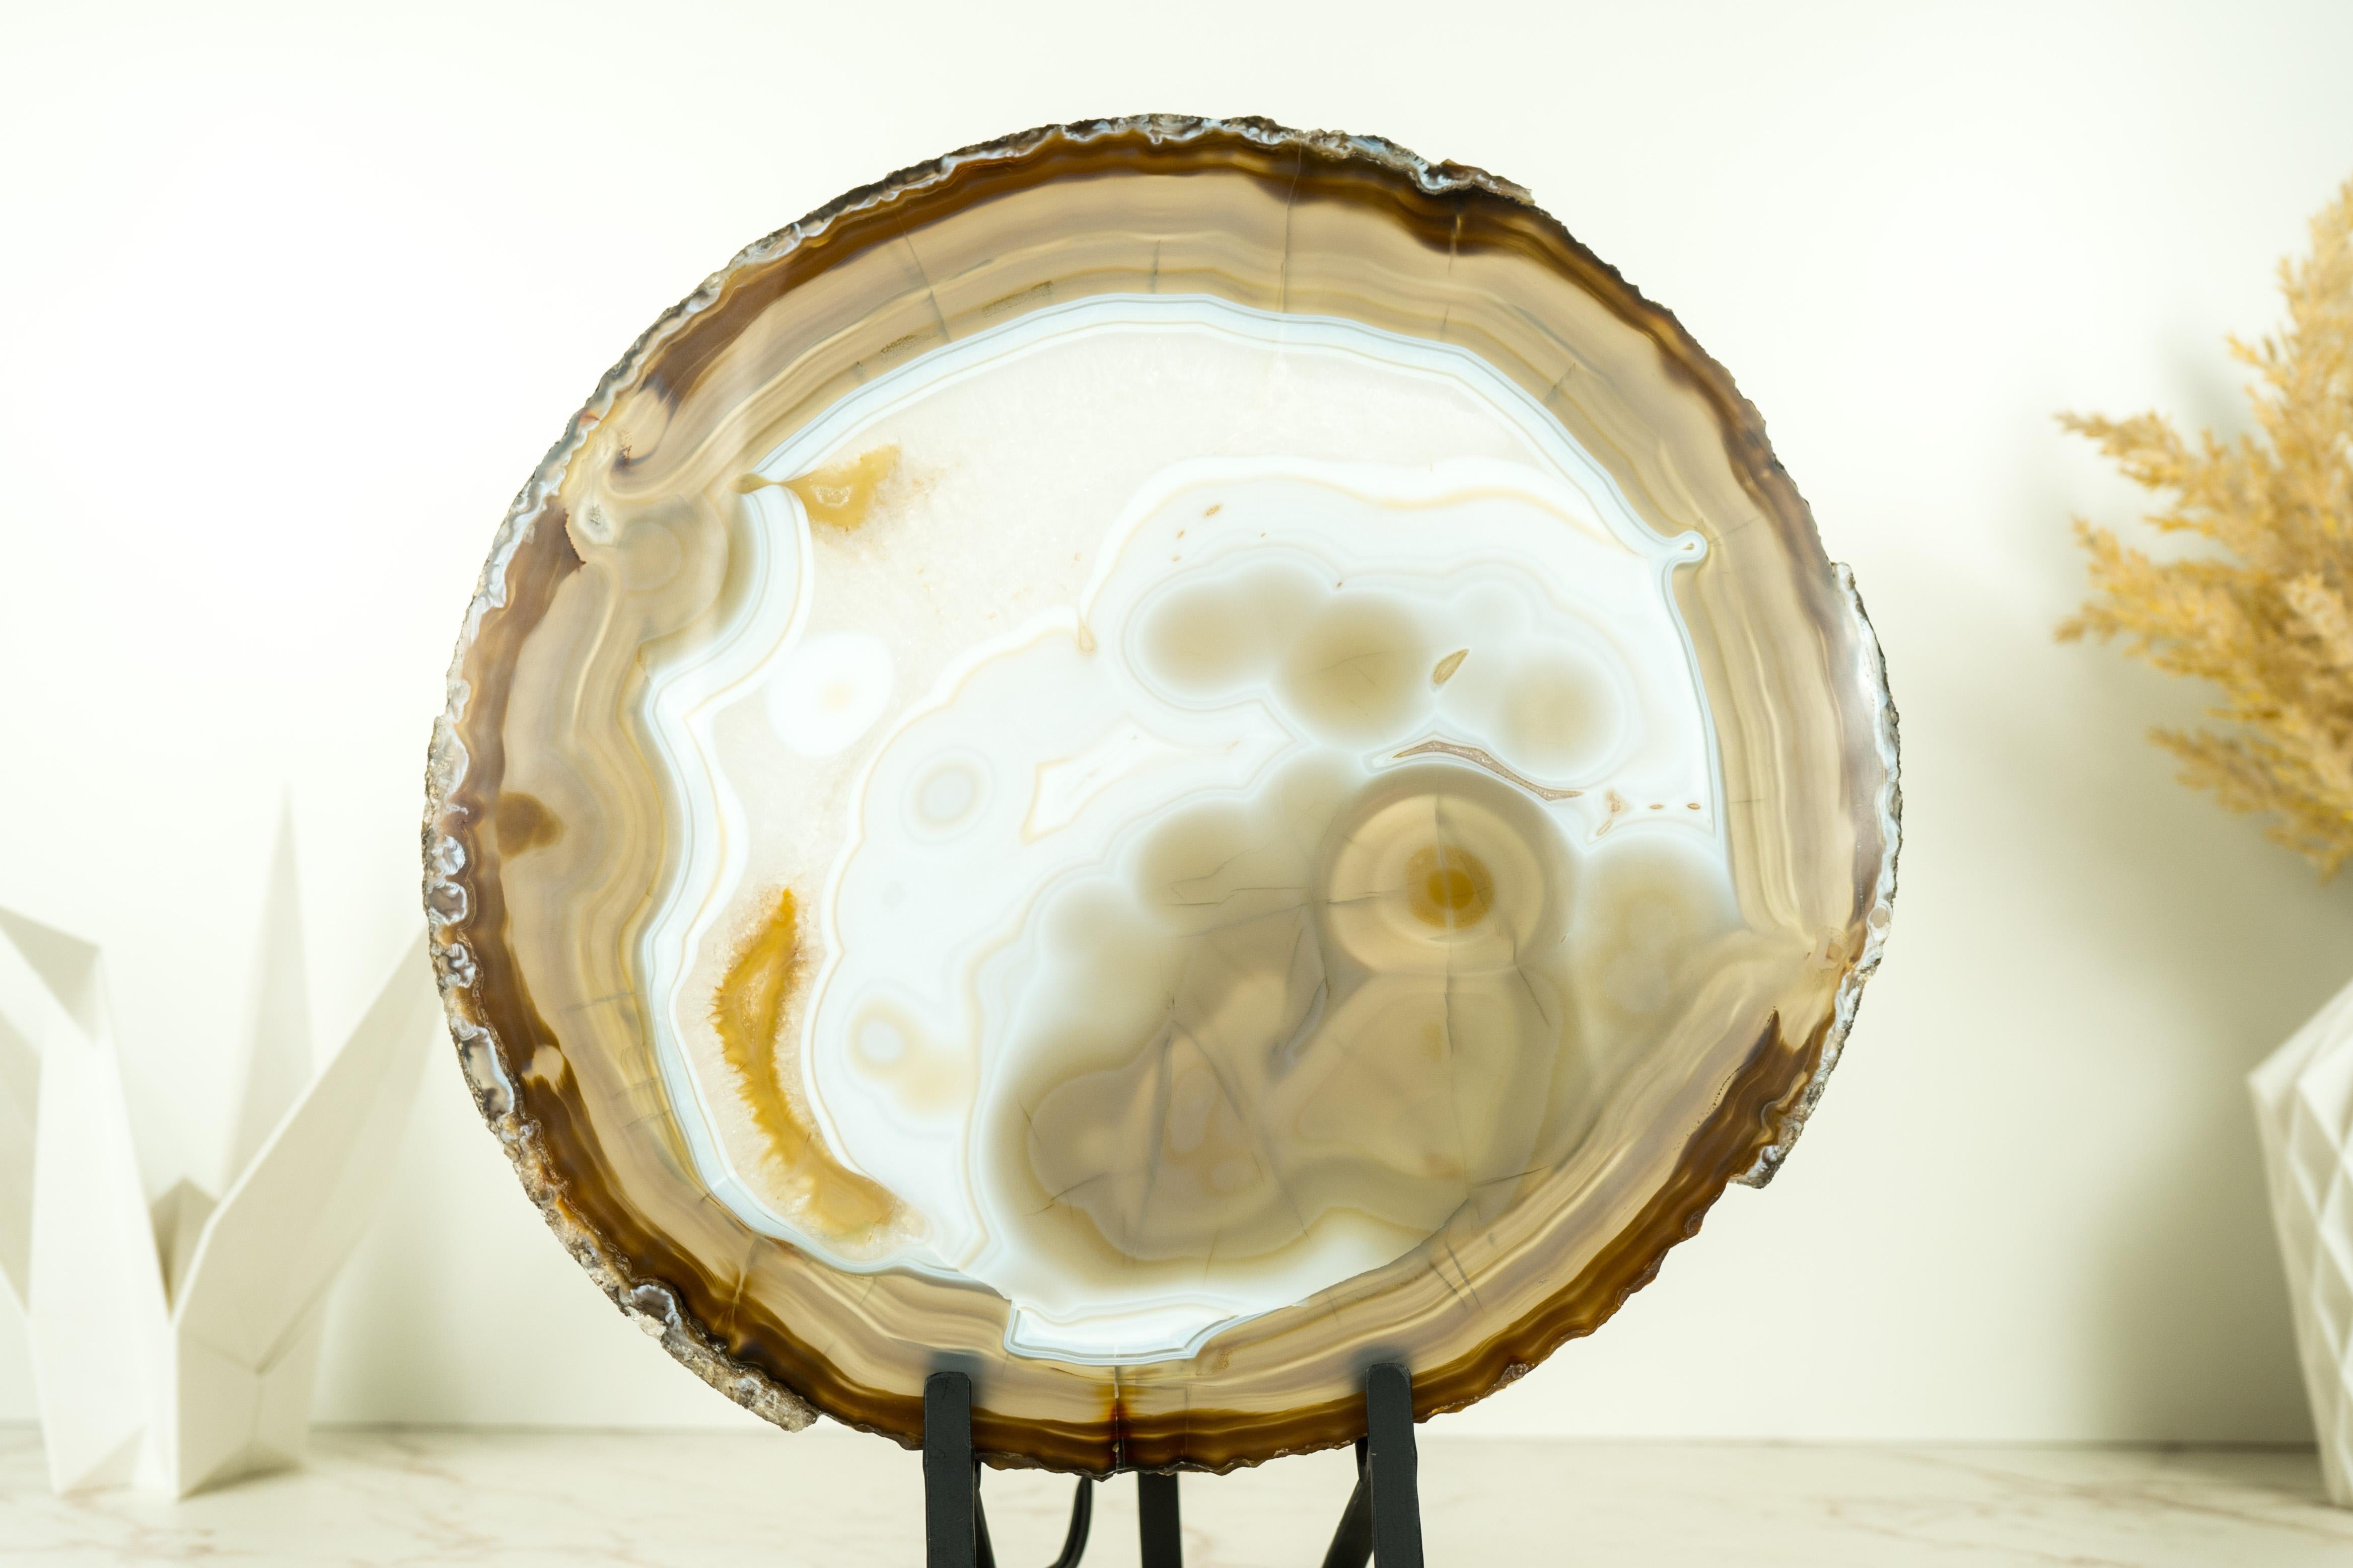 Brazilian Collector-Grade Agate Slice with a Drawing of a Person Contemplating the Sky For Sale